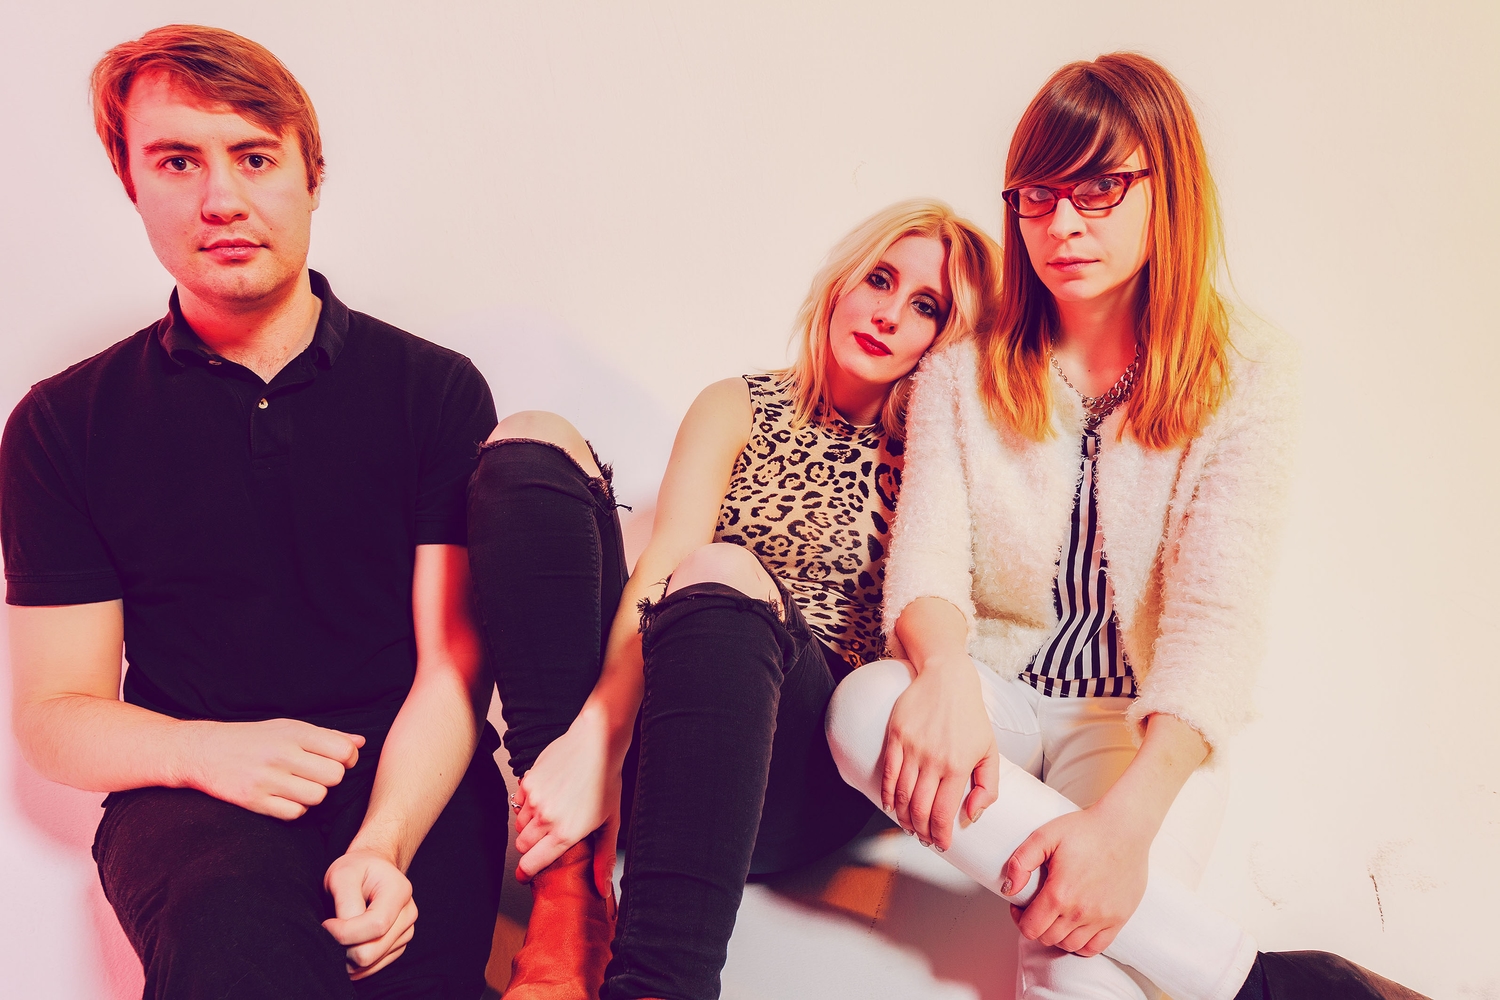 White Lung: "We all want that power"